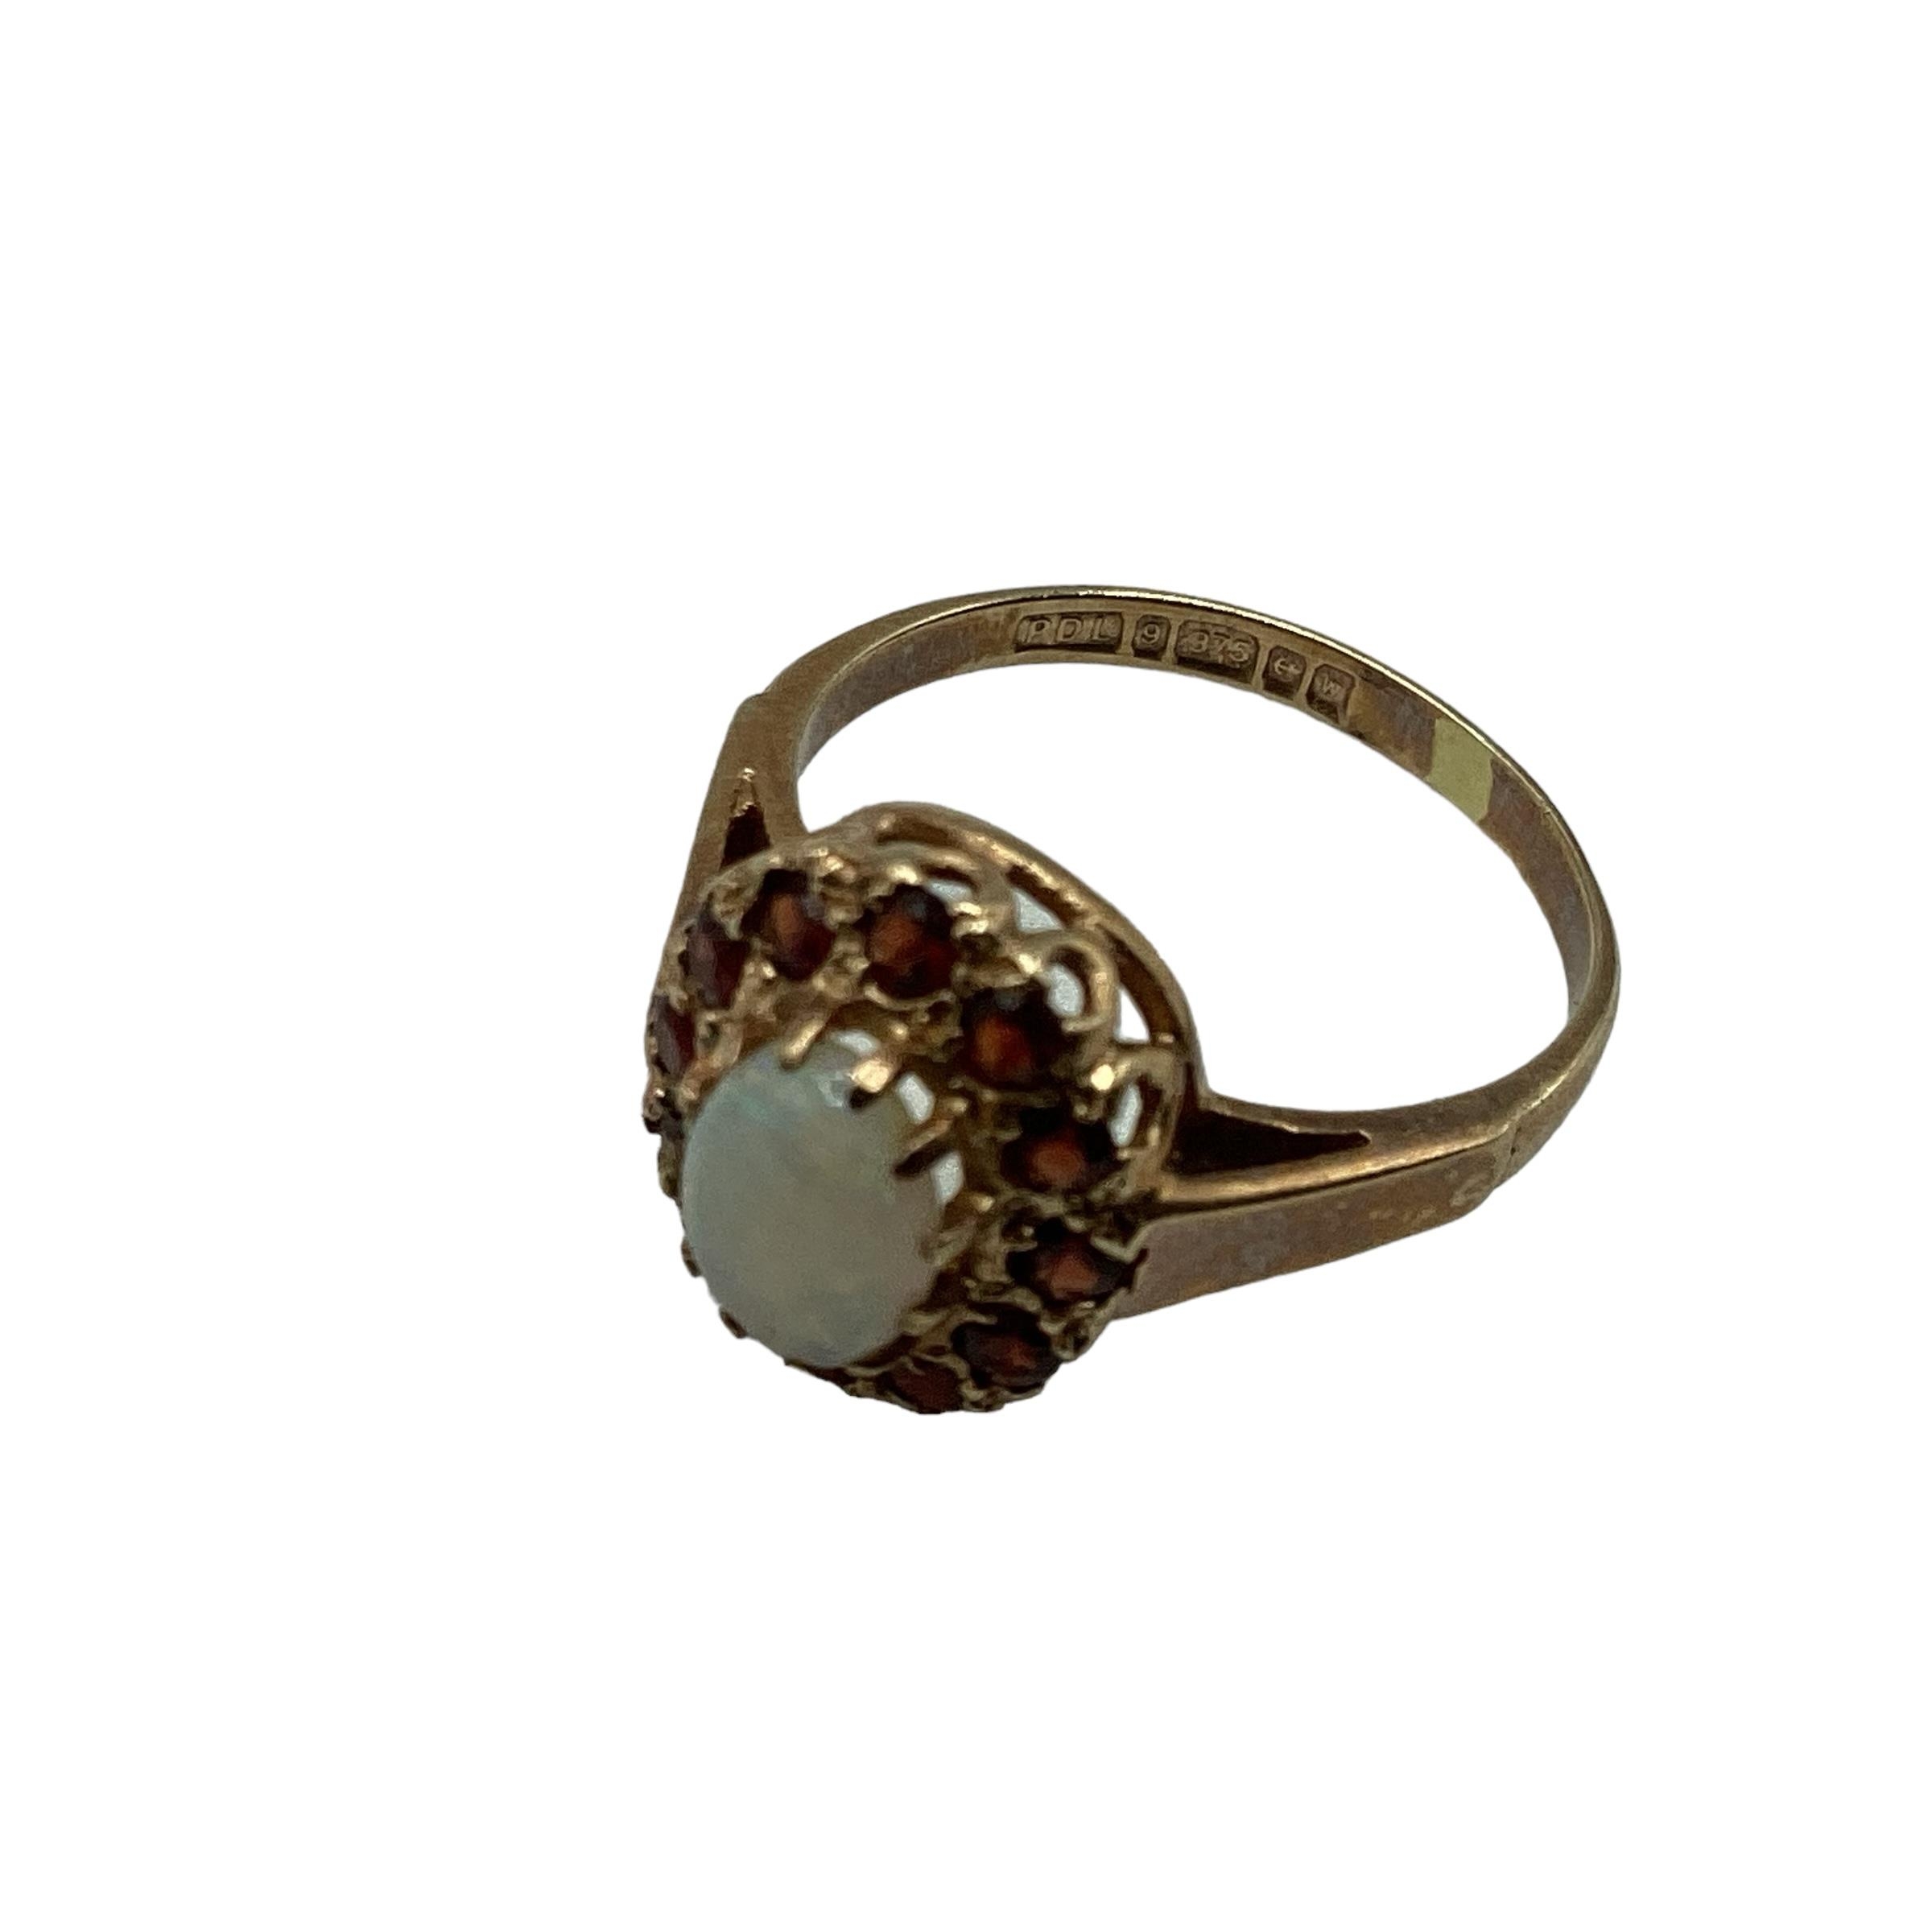 9 ct gold opal and garnet ring central oval opal with a surround of single cut red garnets size K, - Image 5 of 5